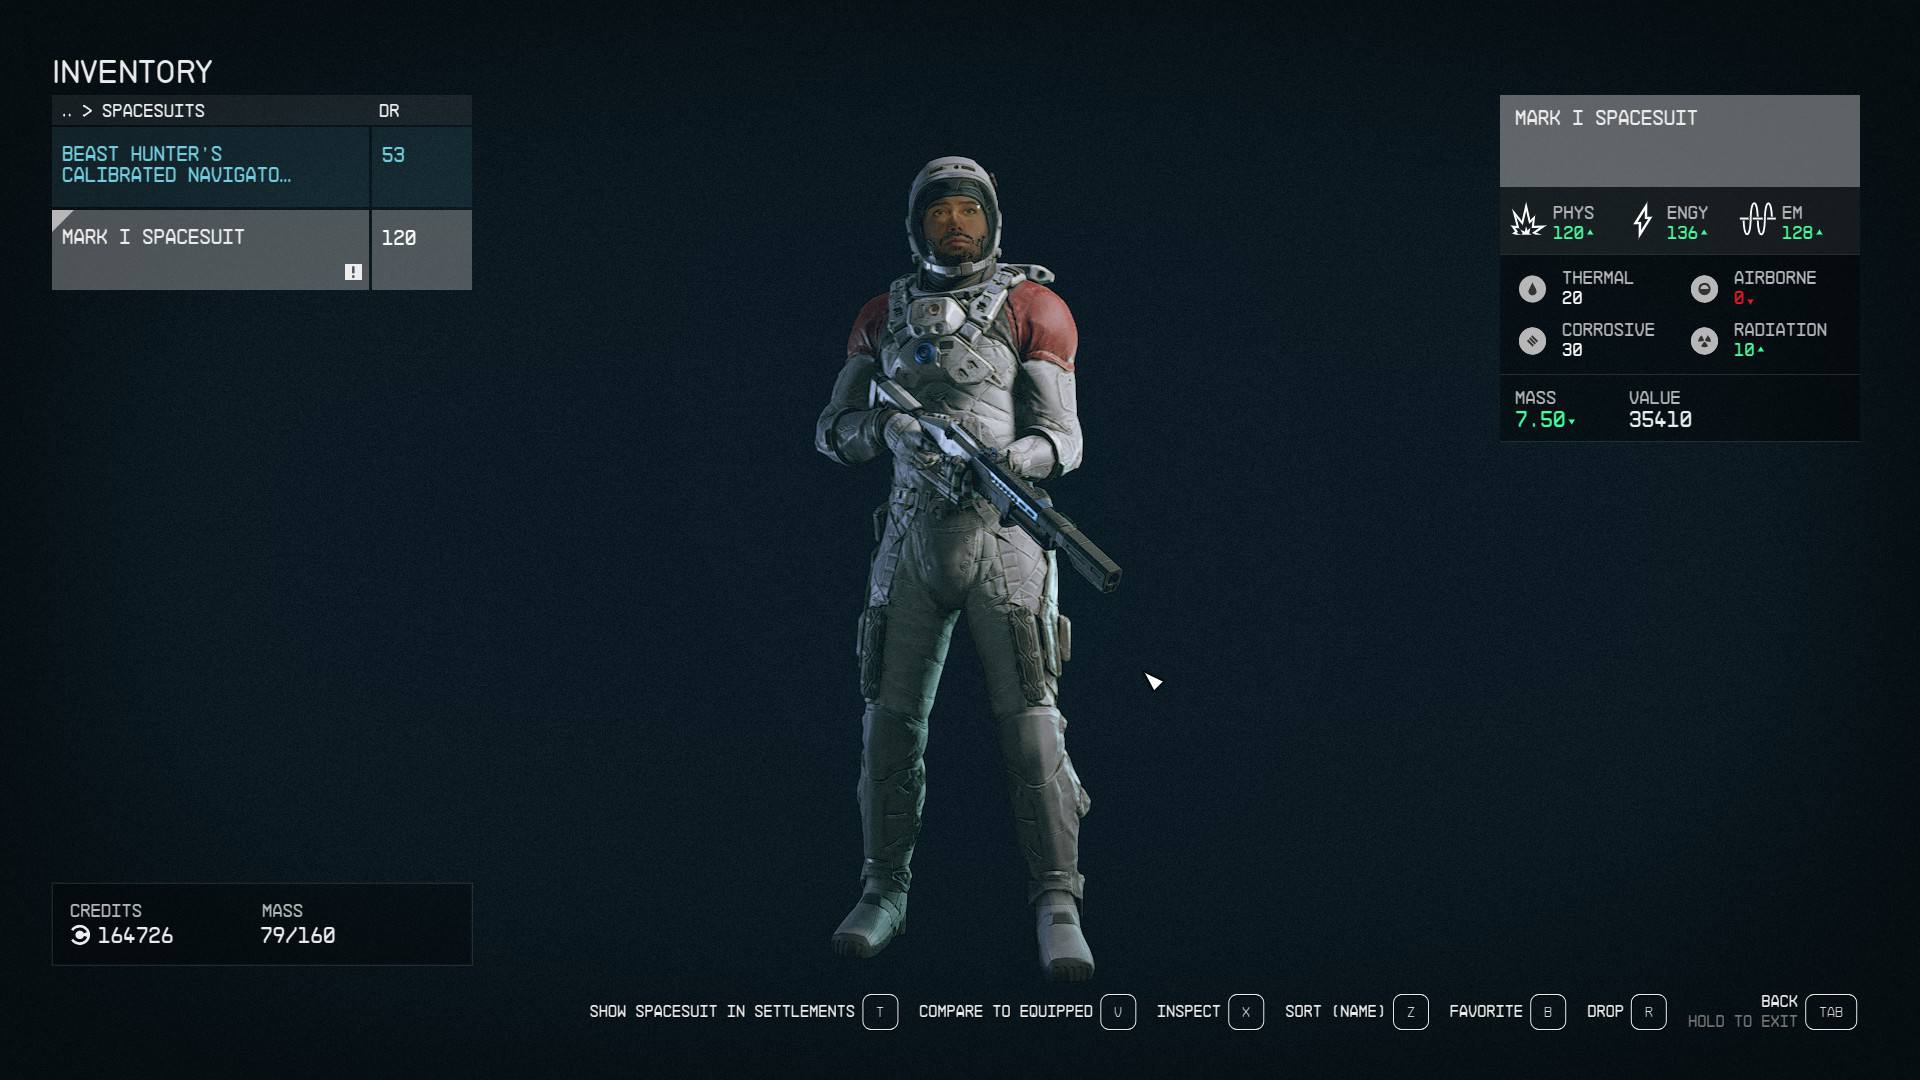 Starfield best spacesuits: A player with the Mark I set equipped in the inventory menu.